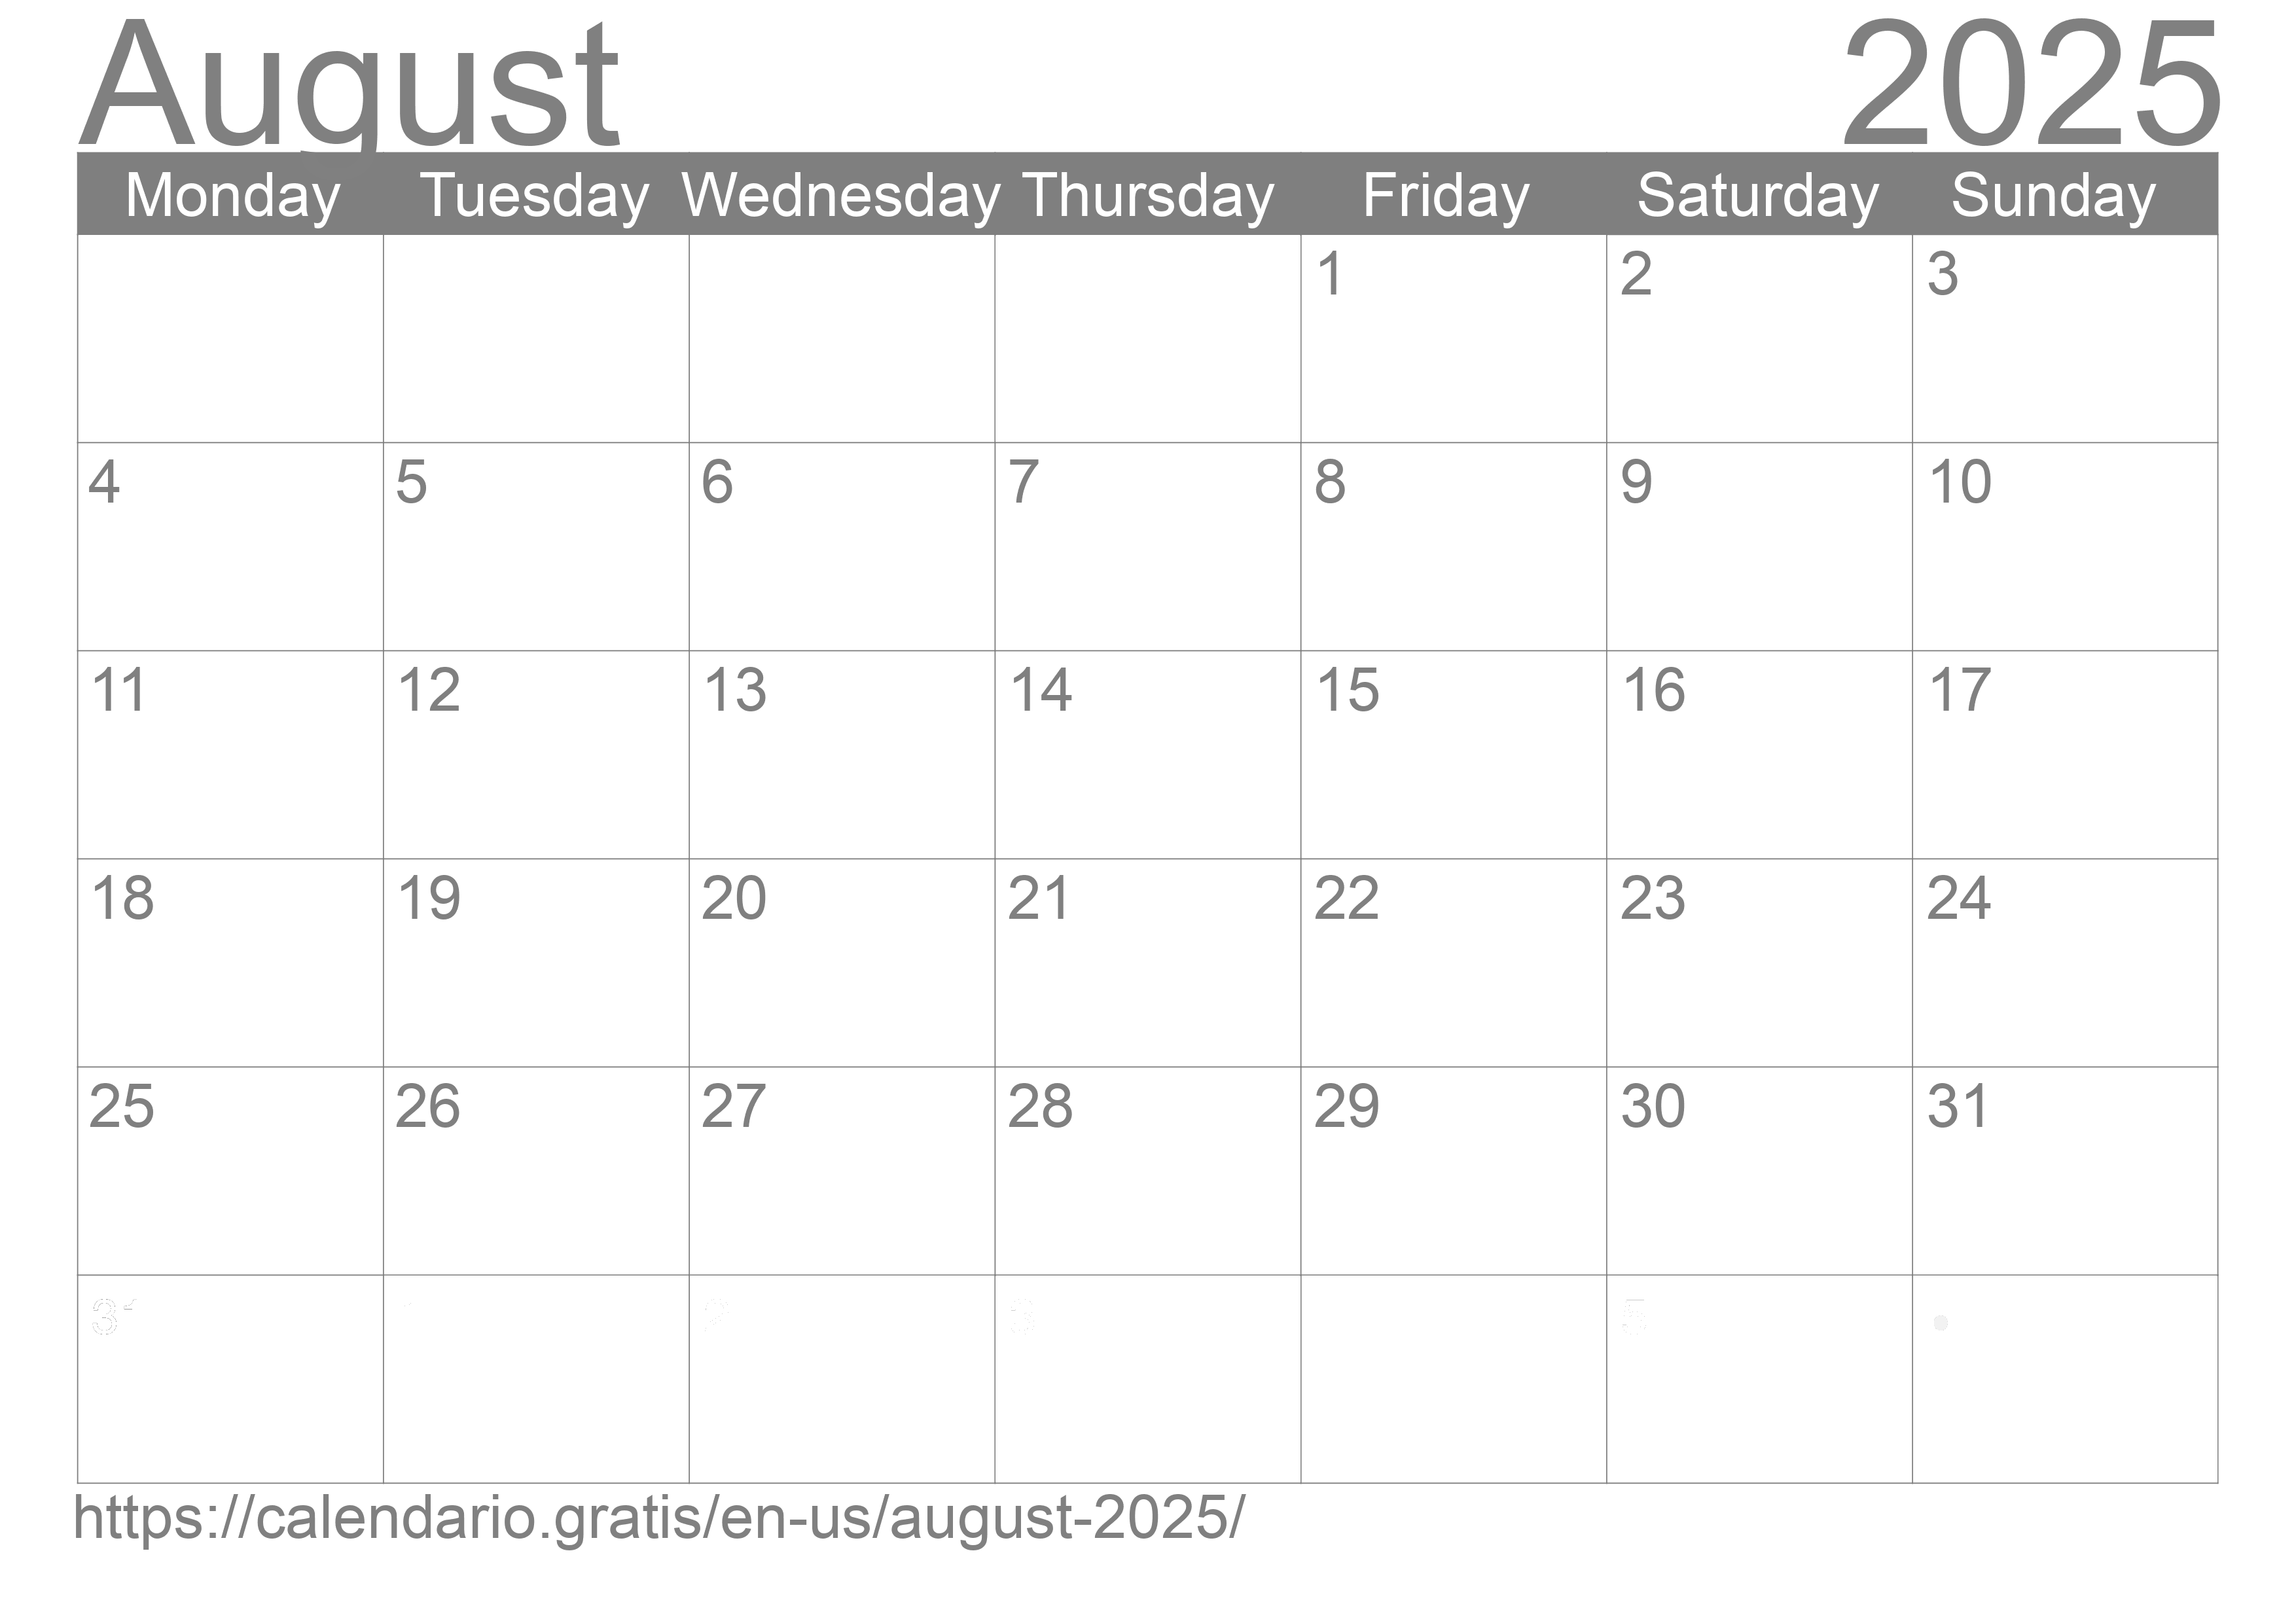 Calendar August 2025 from United States of America in English ☑️